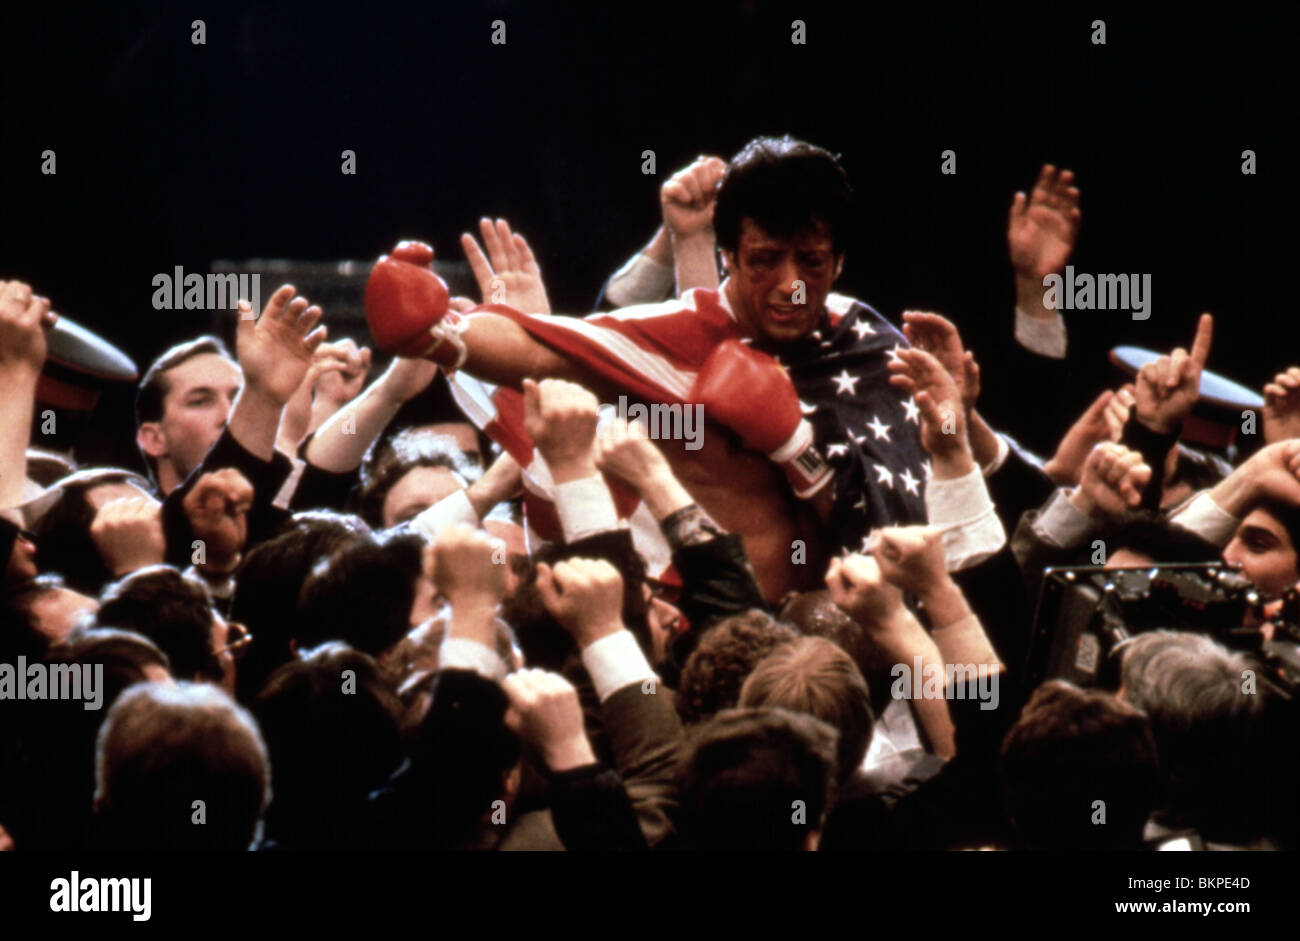 ROCKY IV (1985), Sylvester Stallone RK4 096 Banque D'Images